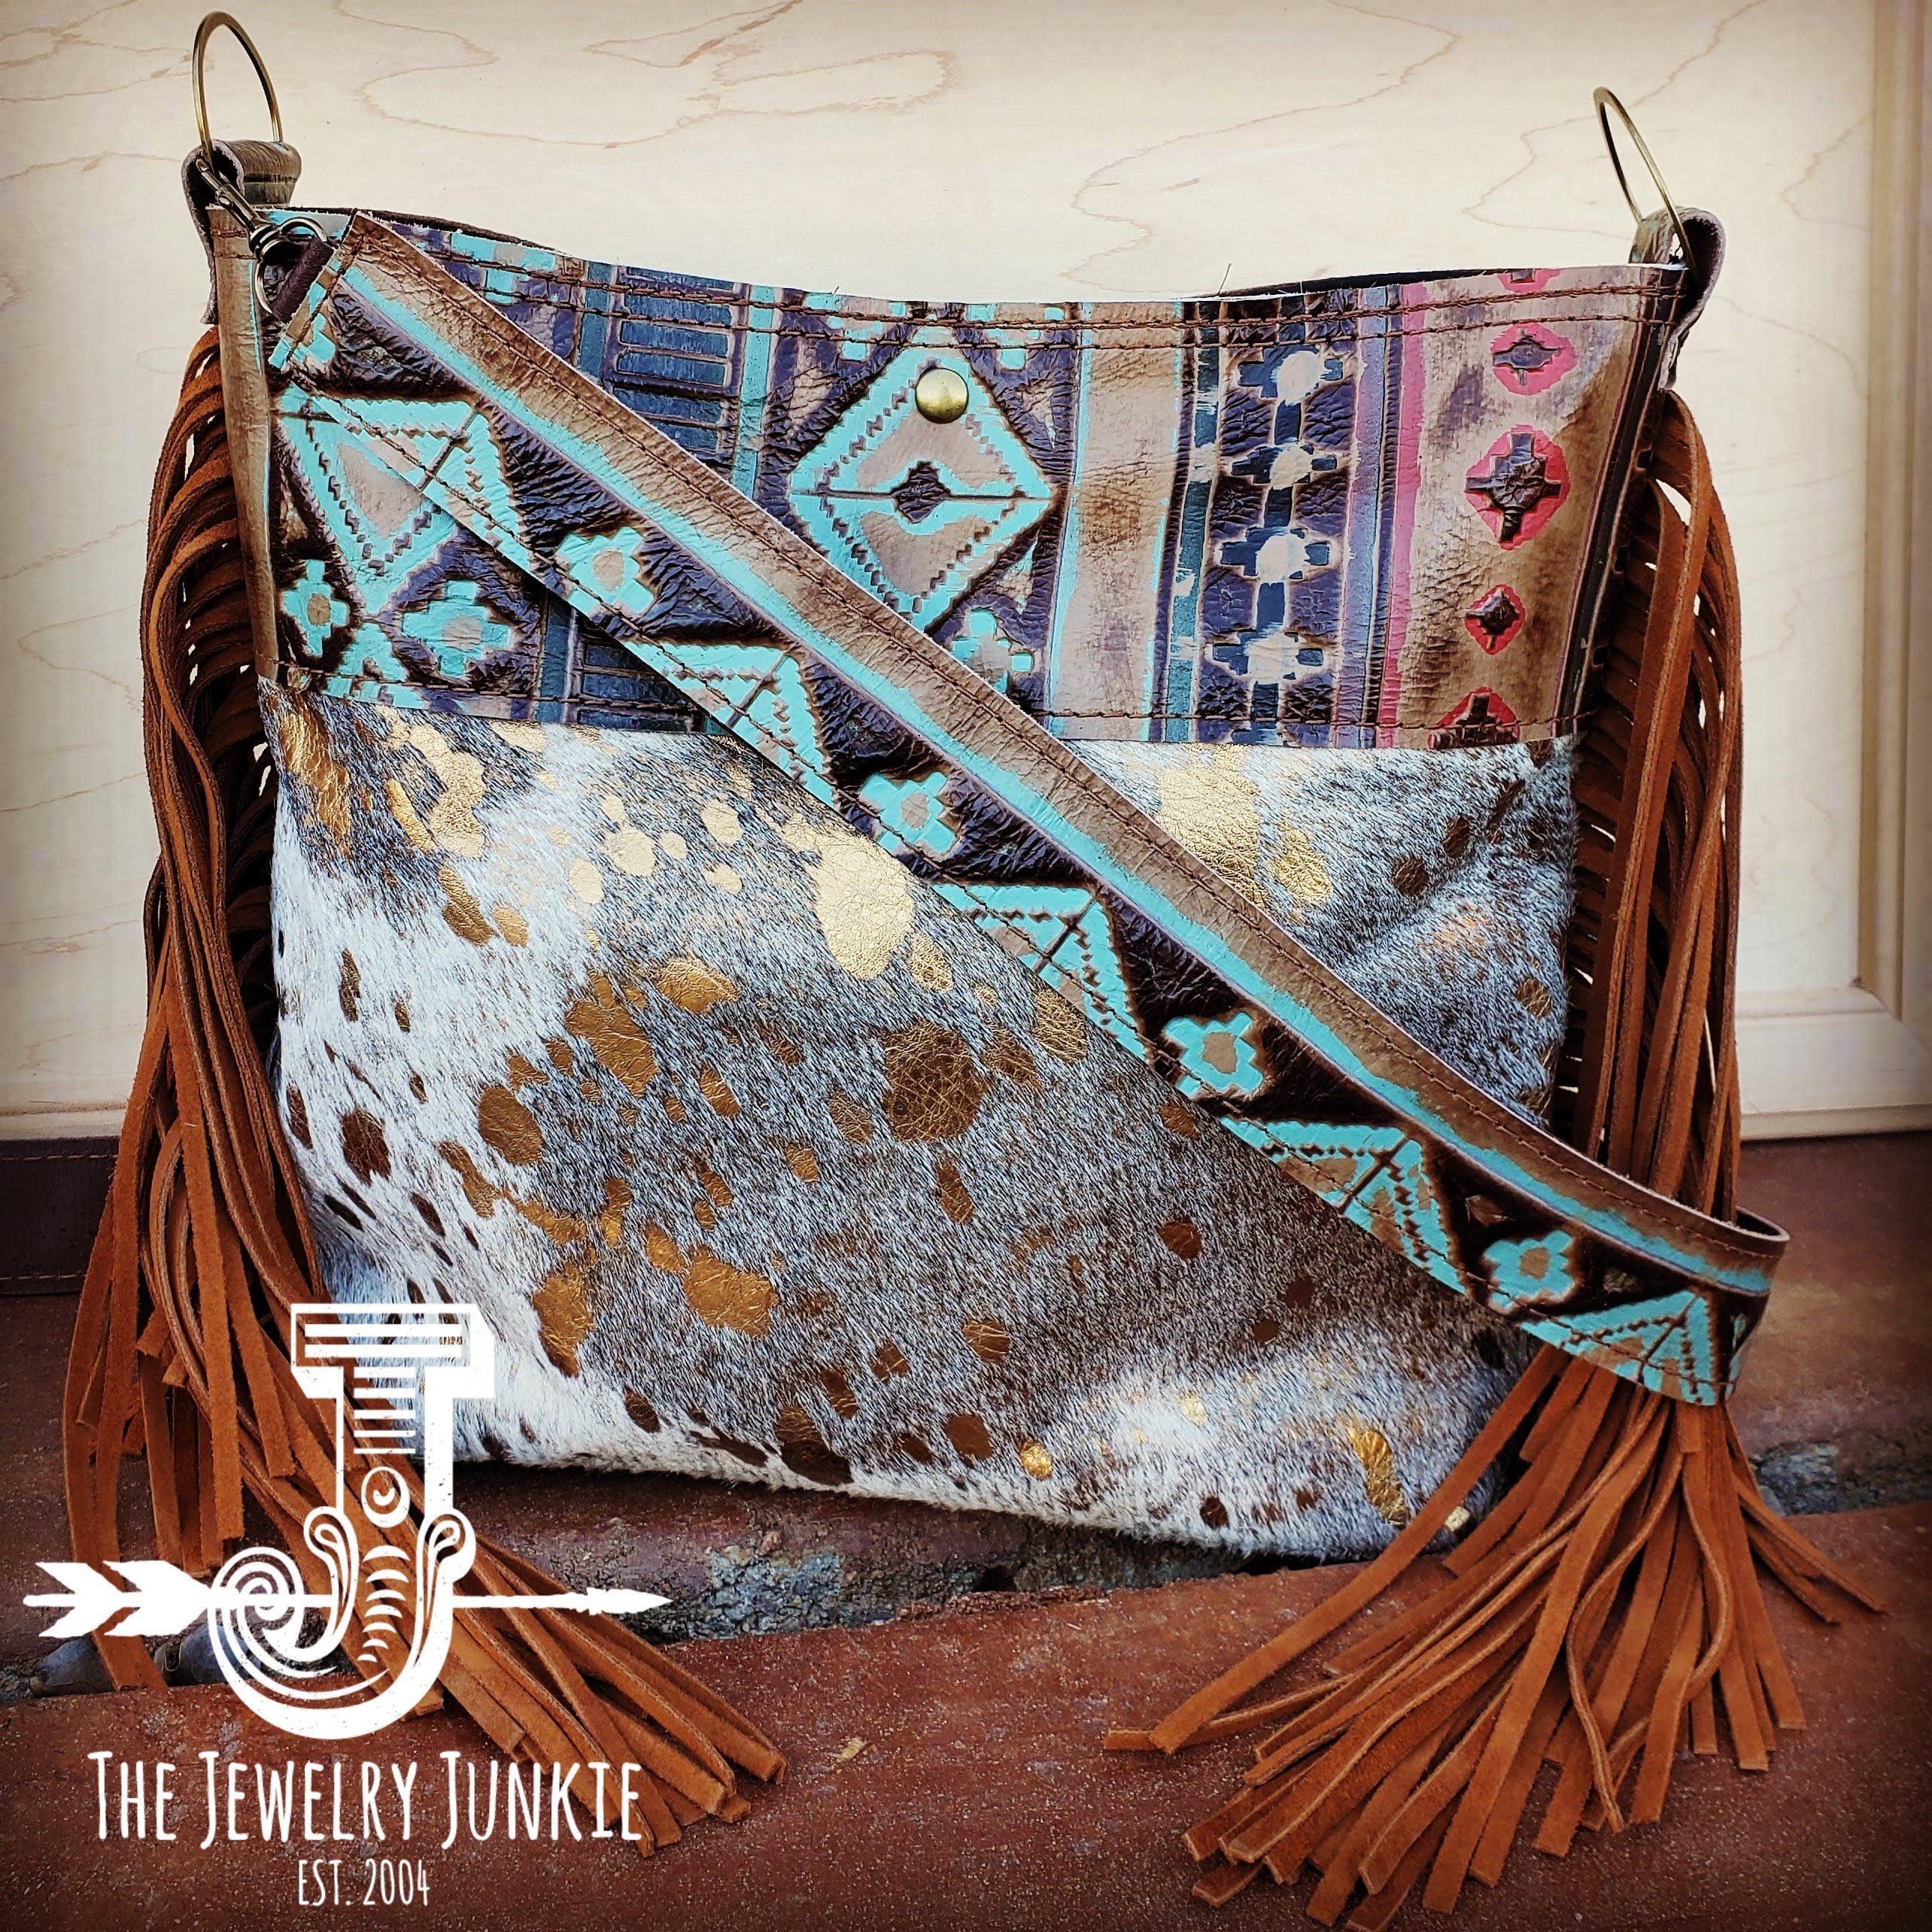 New Statement Bag! Cowhide, fringe and a bold belt buckle all in